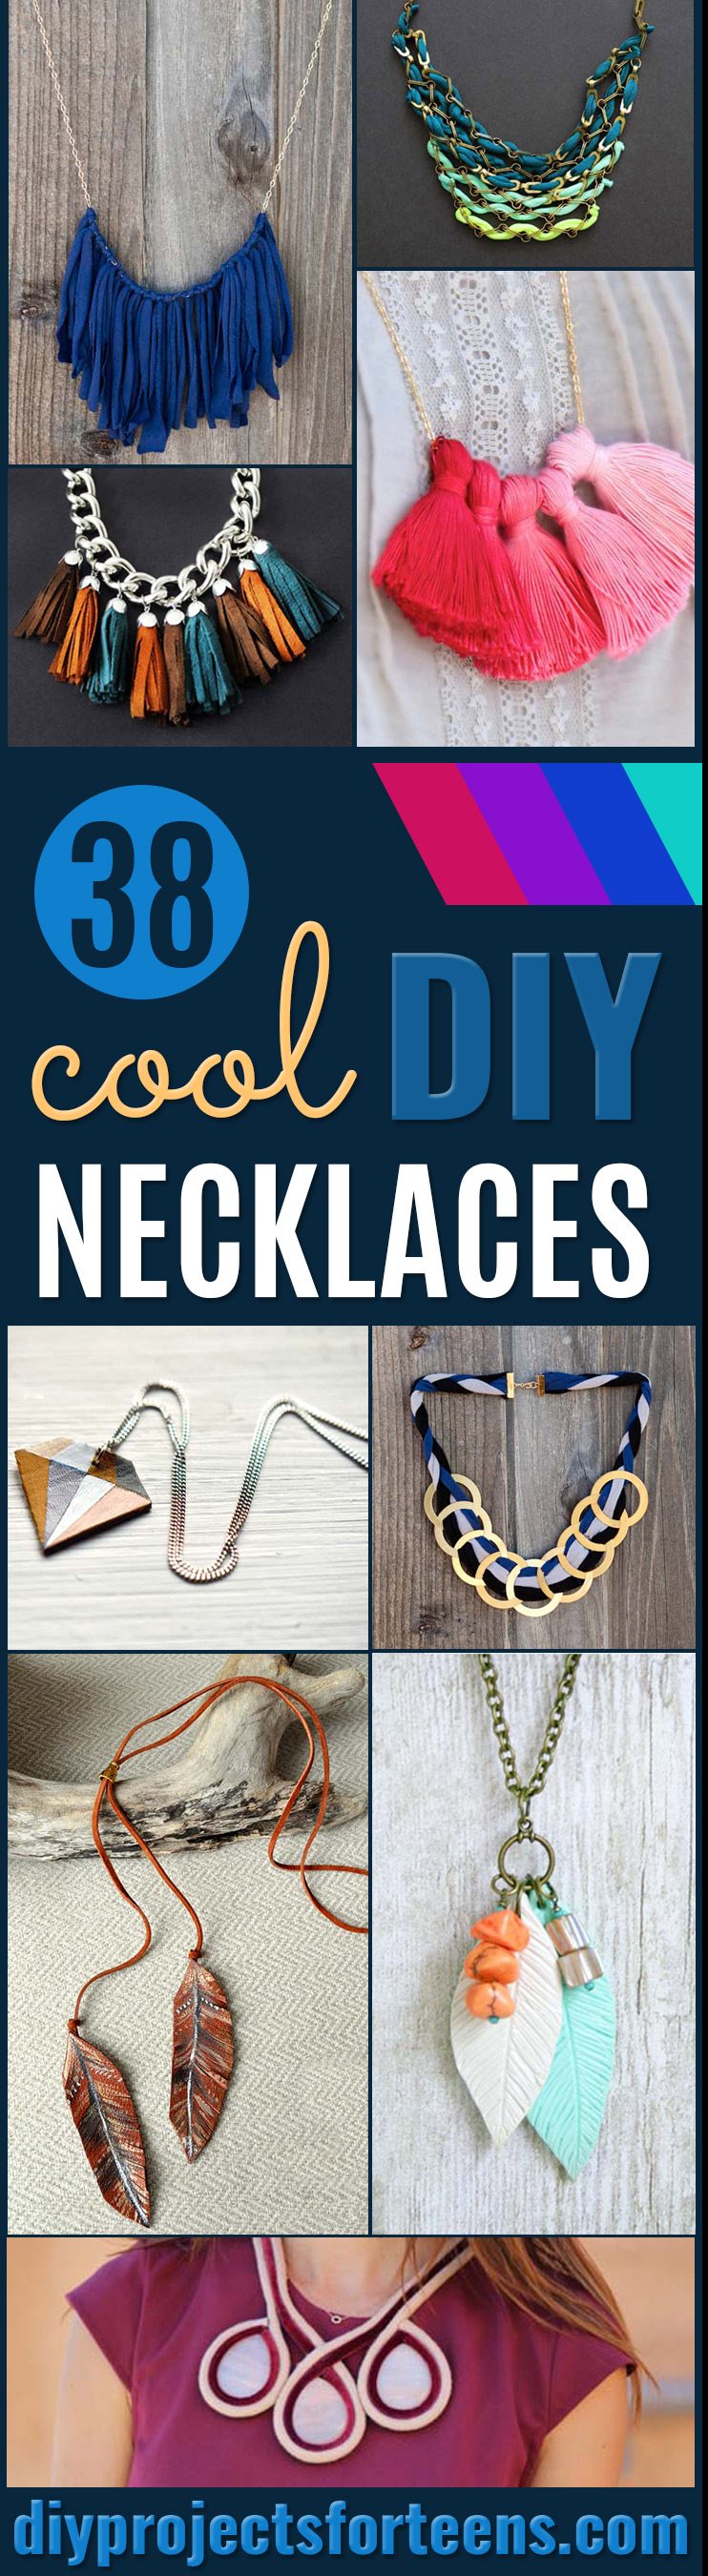 DIY Necklace Ideas - Pendant, Beads, Statement, Choker, Layered Boho, Chain and Simple Looks - Creative Jewlery Making Ideas for Women and Teens, Girls - Crafts and Cool Fashion Ideas for Teenagers 